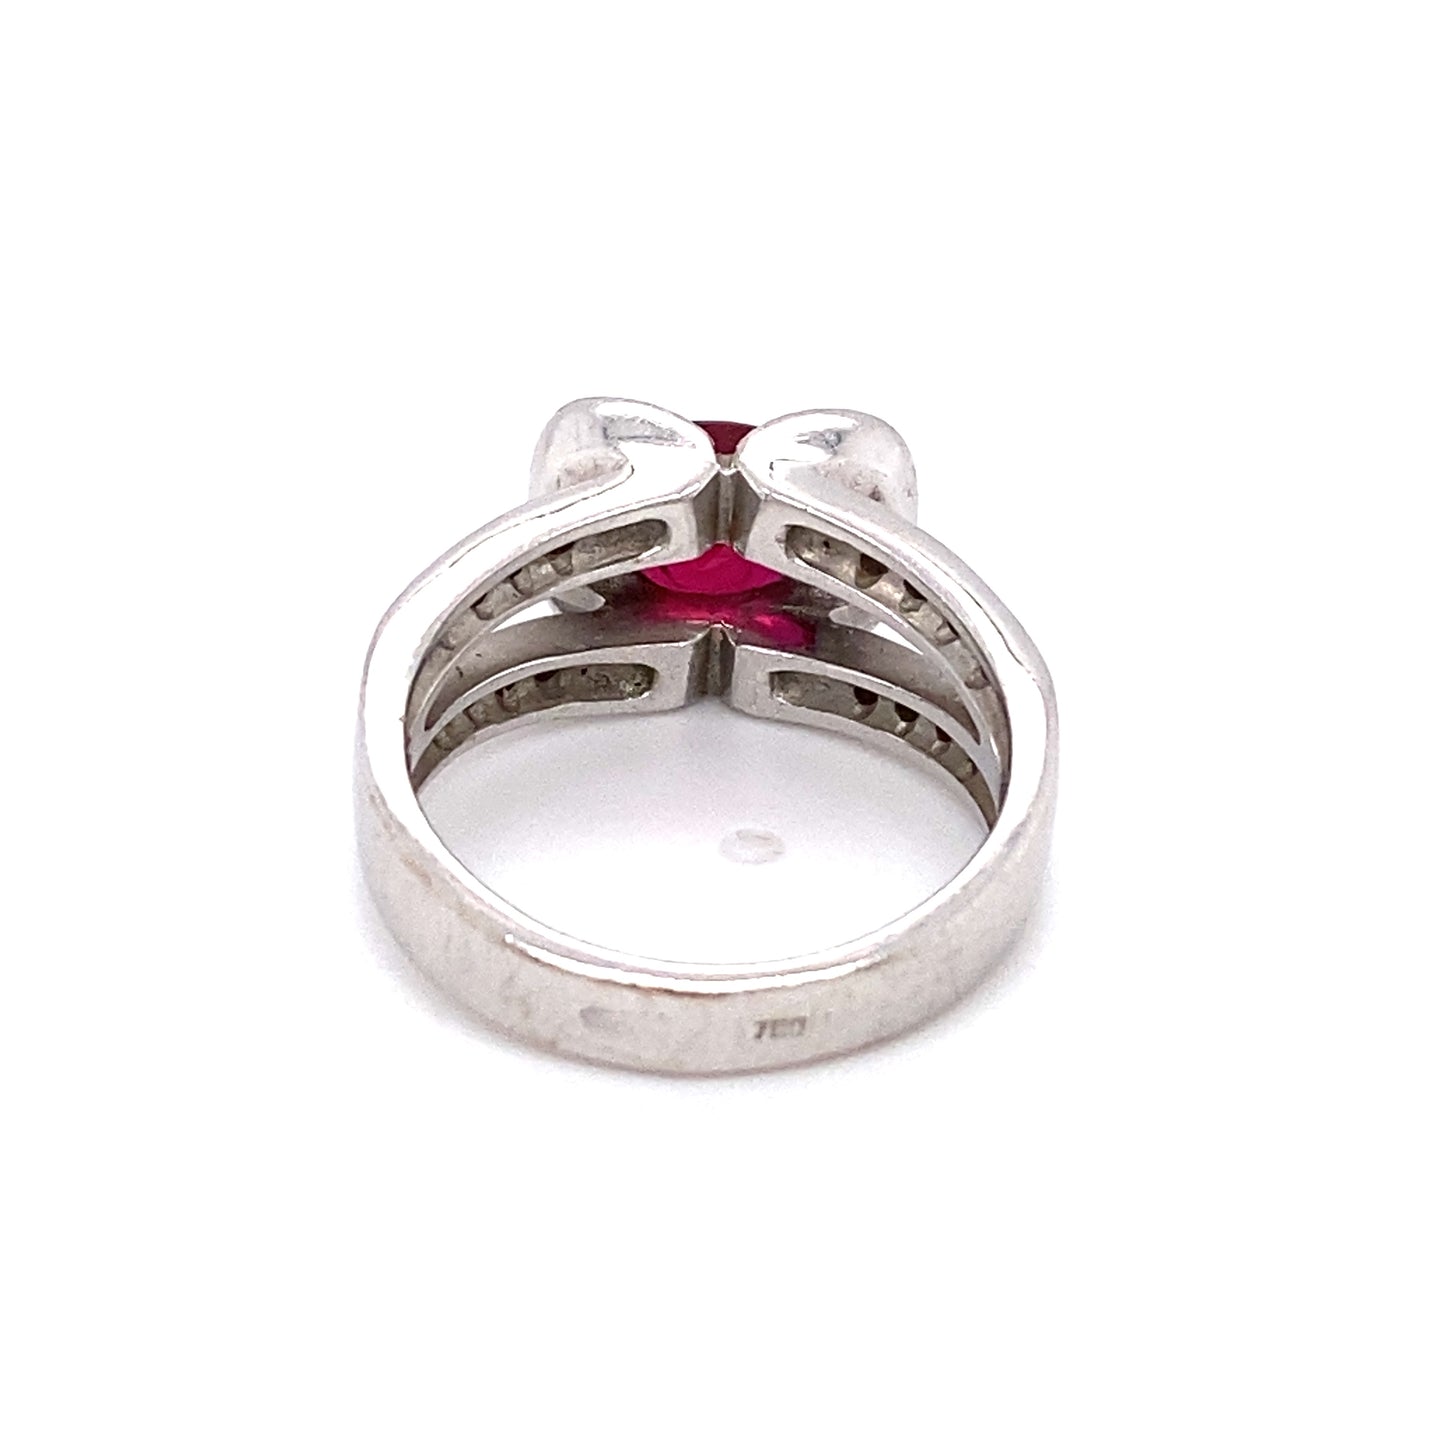 Circa 1990s French 1.20 Carat Oval Ruby and Diamond Ring in Platinum